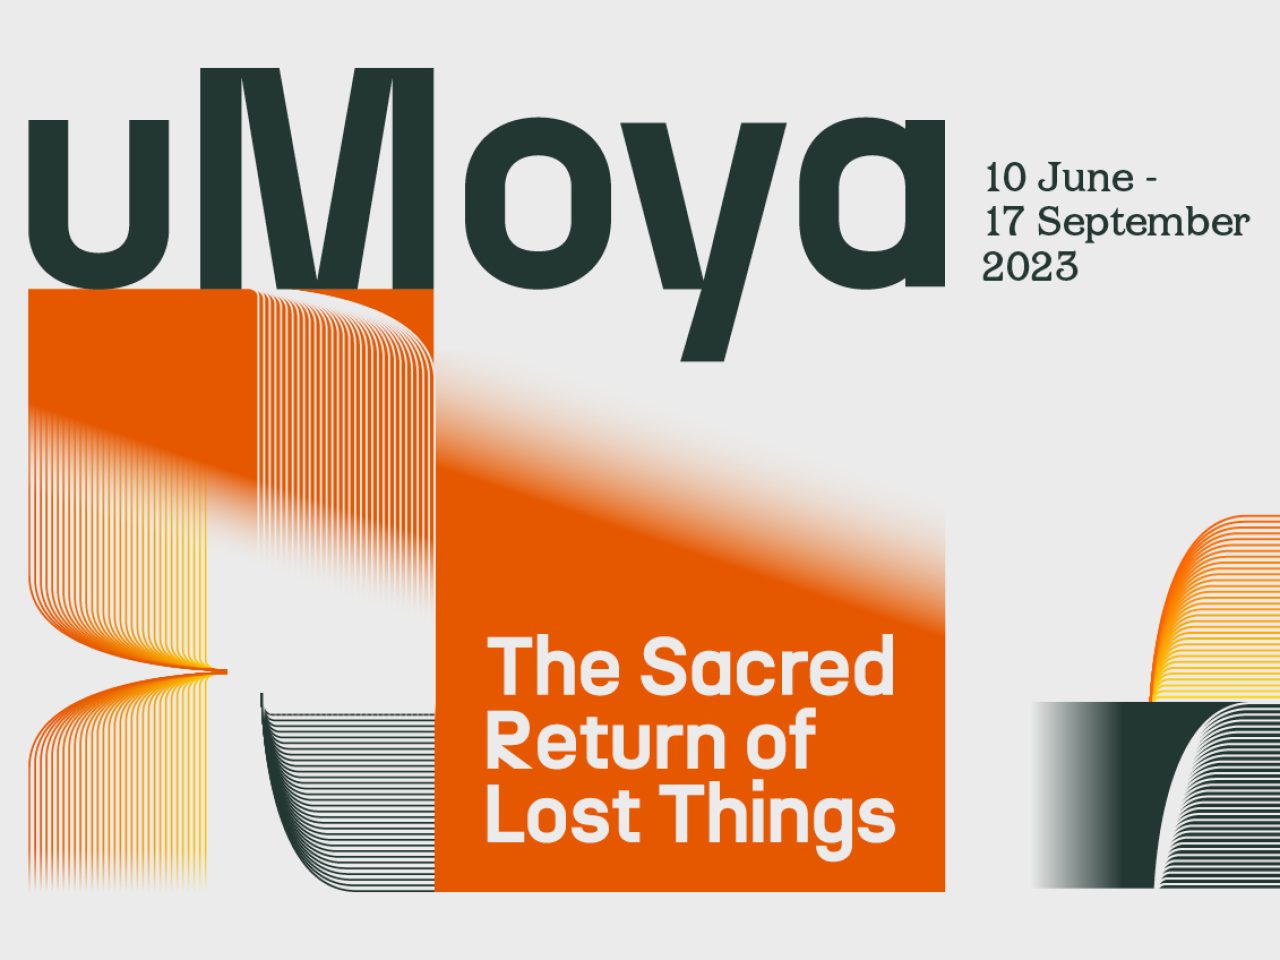 Liverpool Biennial visual identity for 2023. It includes oranf and black block graphics and the title, reading, uMoya, the sacred return of lost things